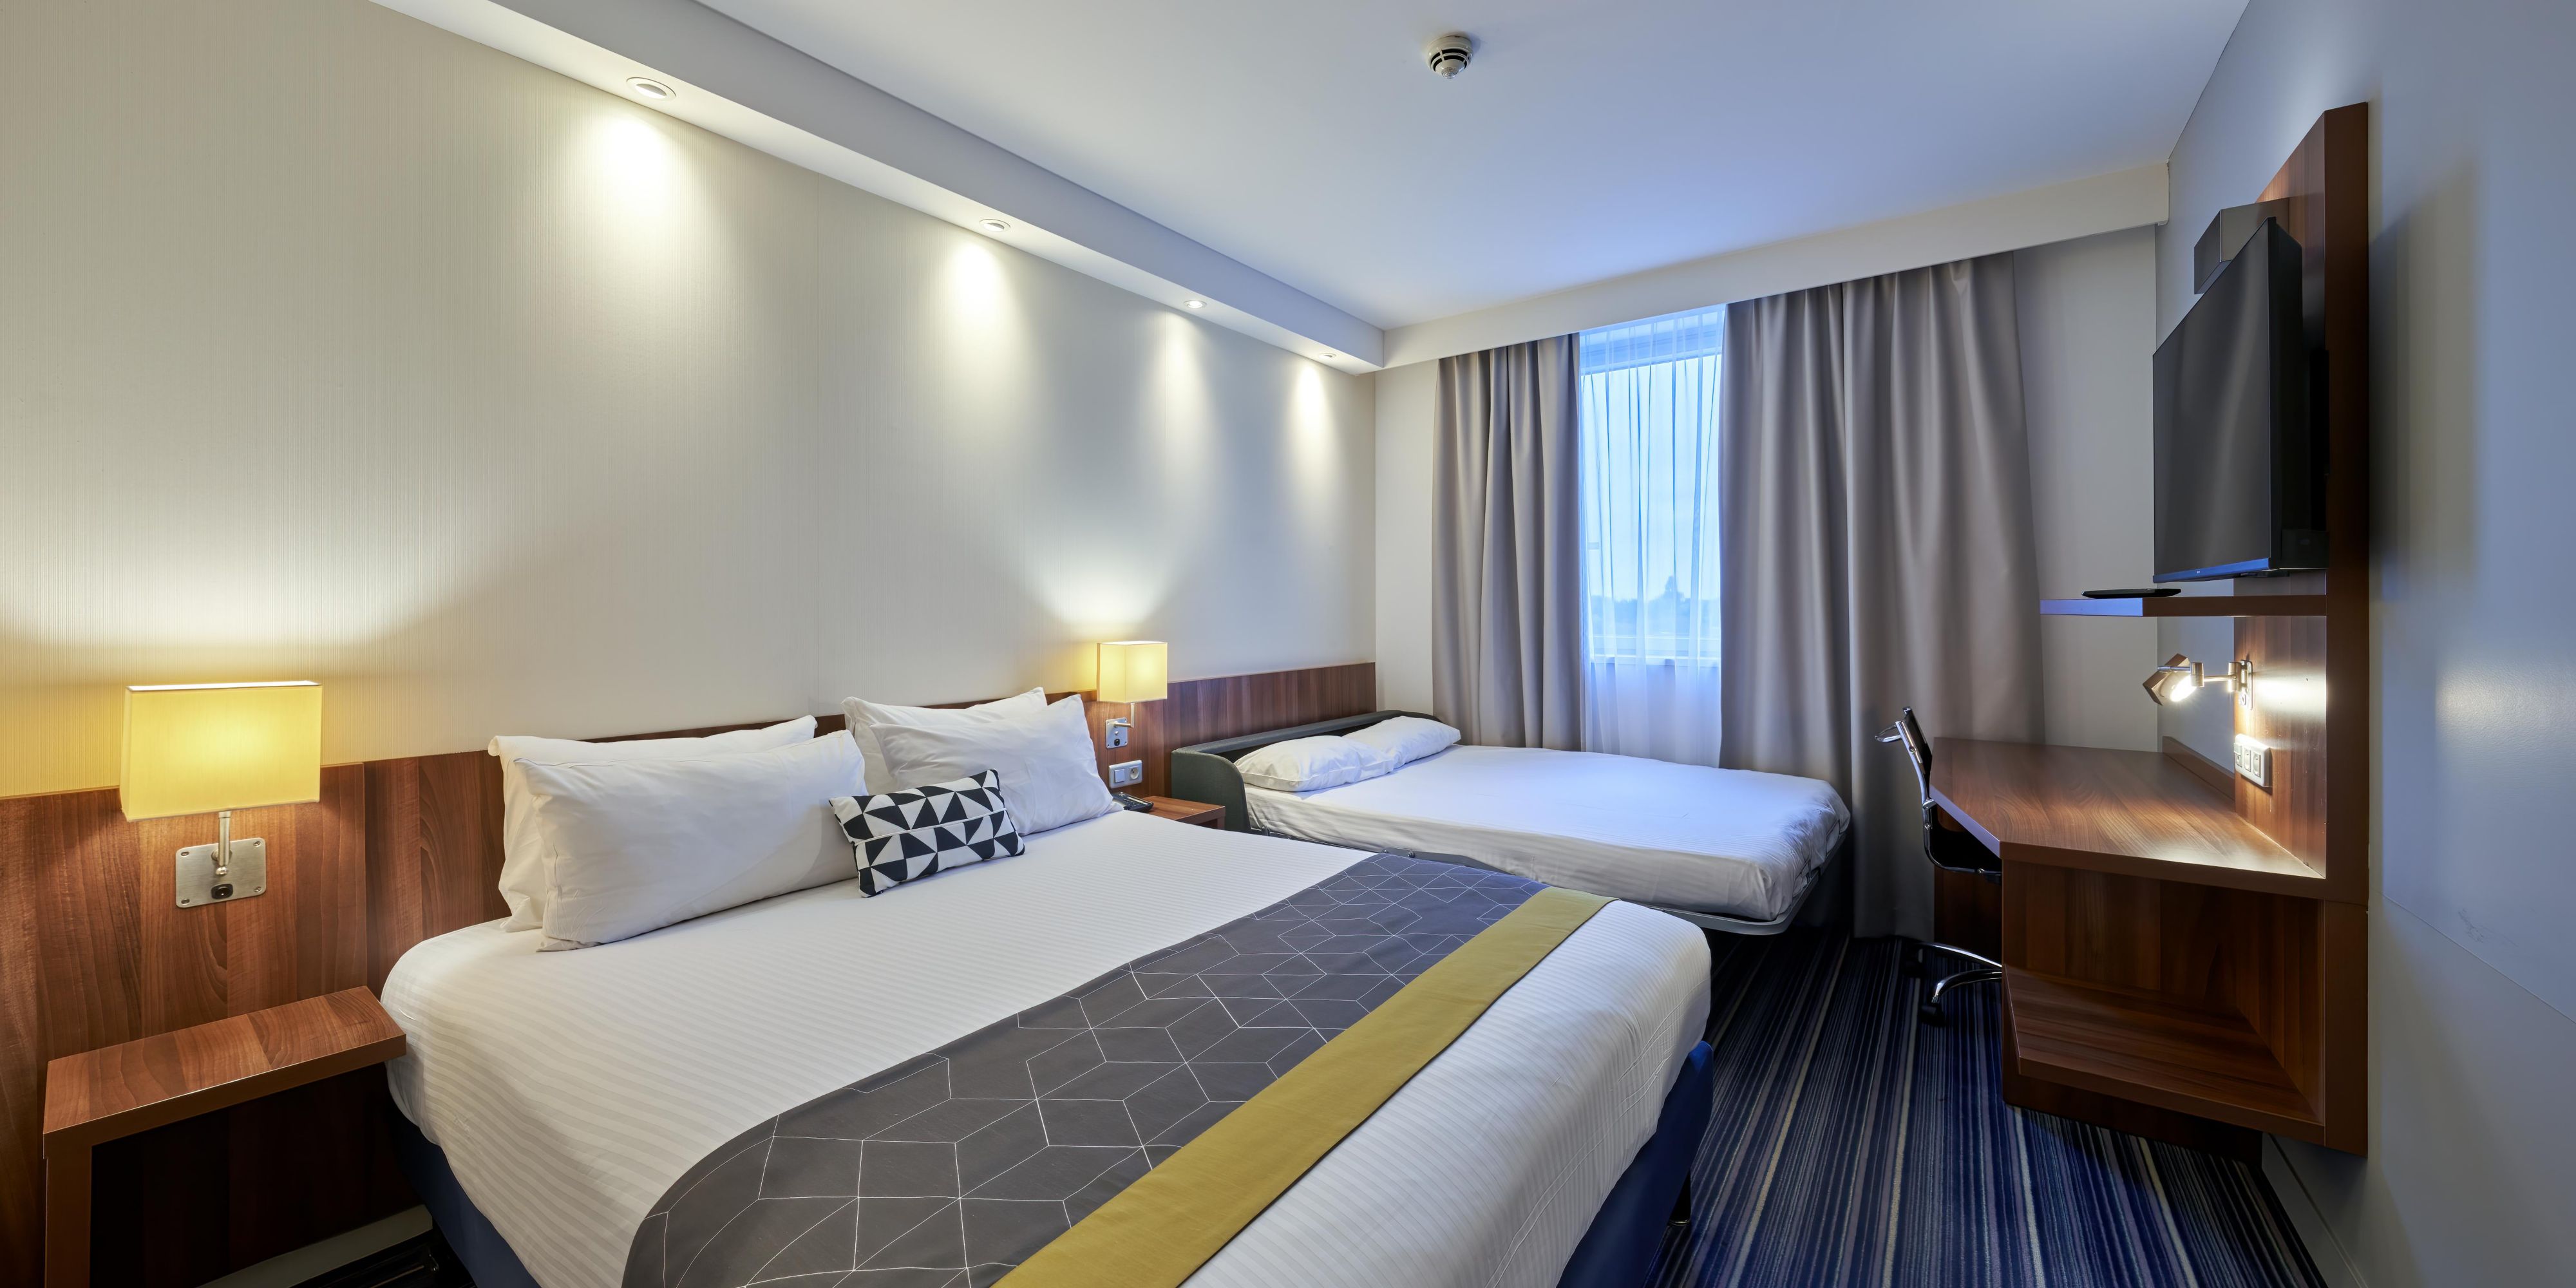 Your entire family is welcomed in our hotel! With our comfortable family rooms equipped by one large bed and a sofa, you can sleep all together and enjoy your stay in our city.